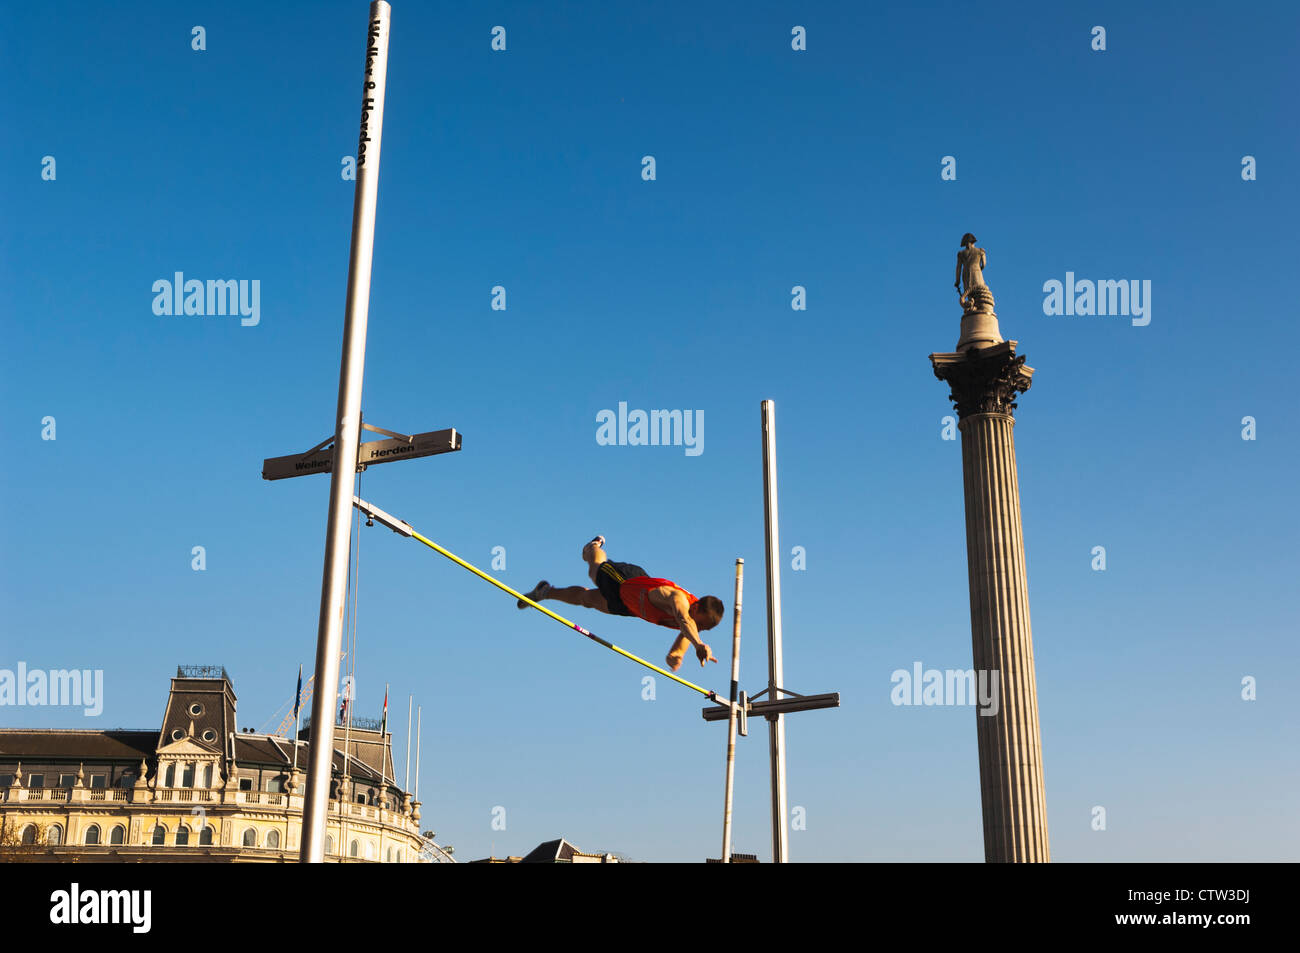 Pole vault in Trafalgar Square, as part of a celebration of Dutch culture, during the Holland House Festival 2010. Stock Photo